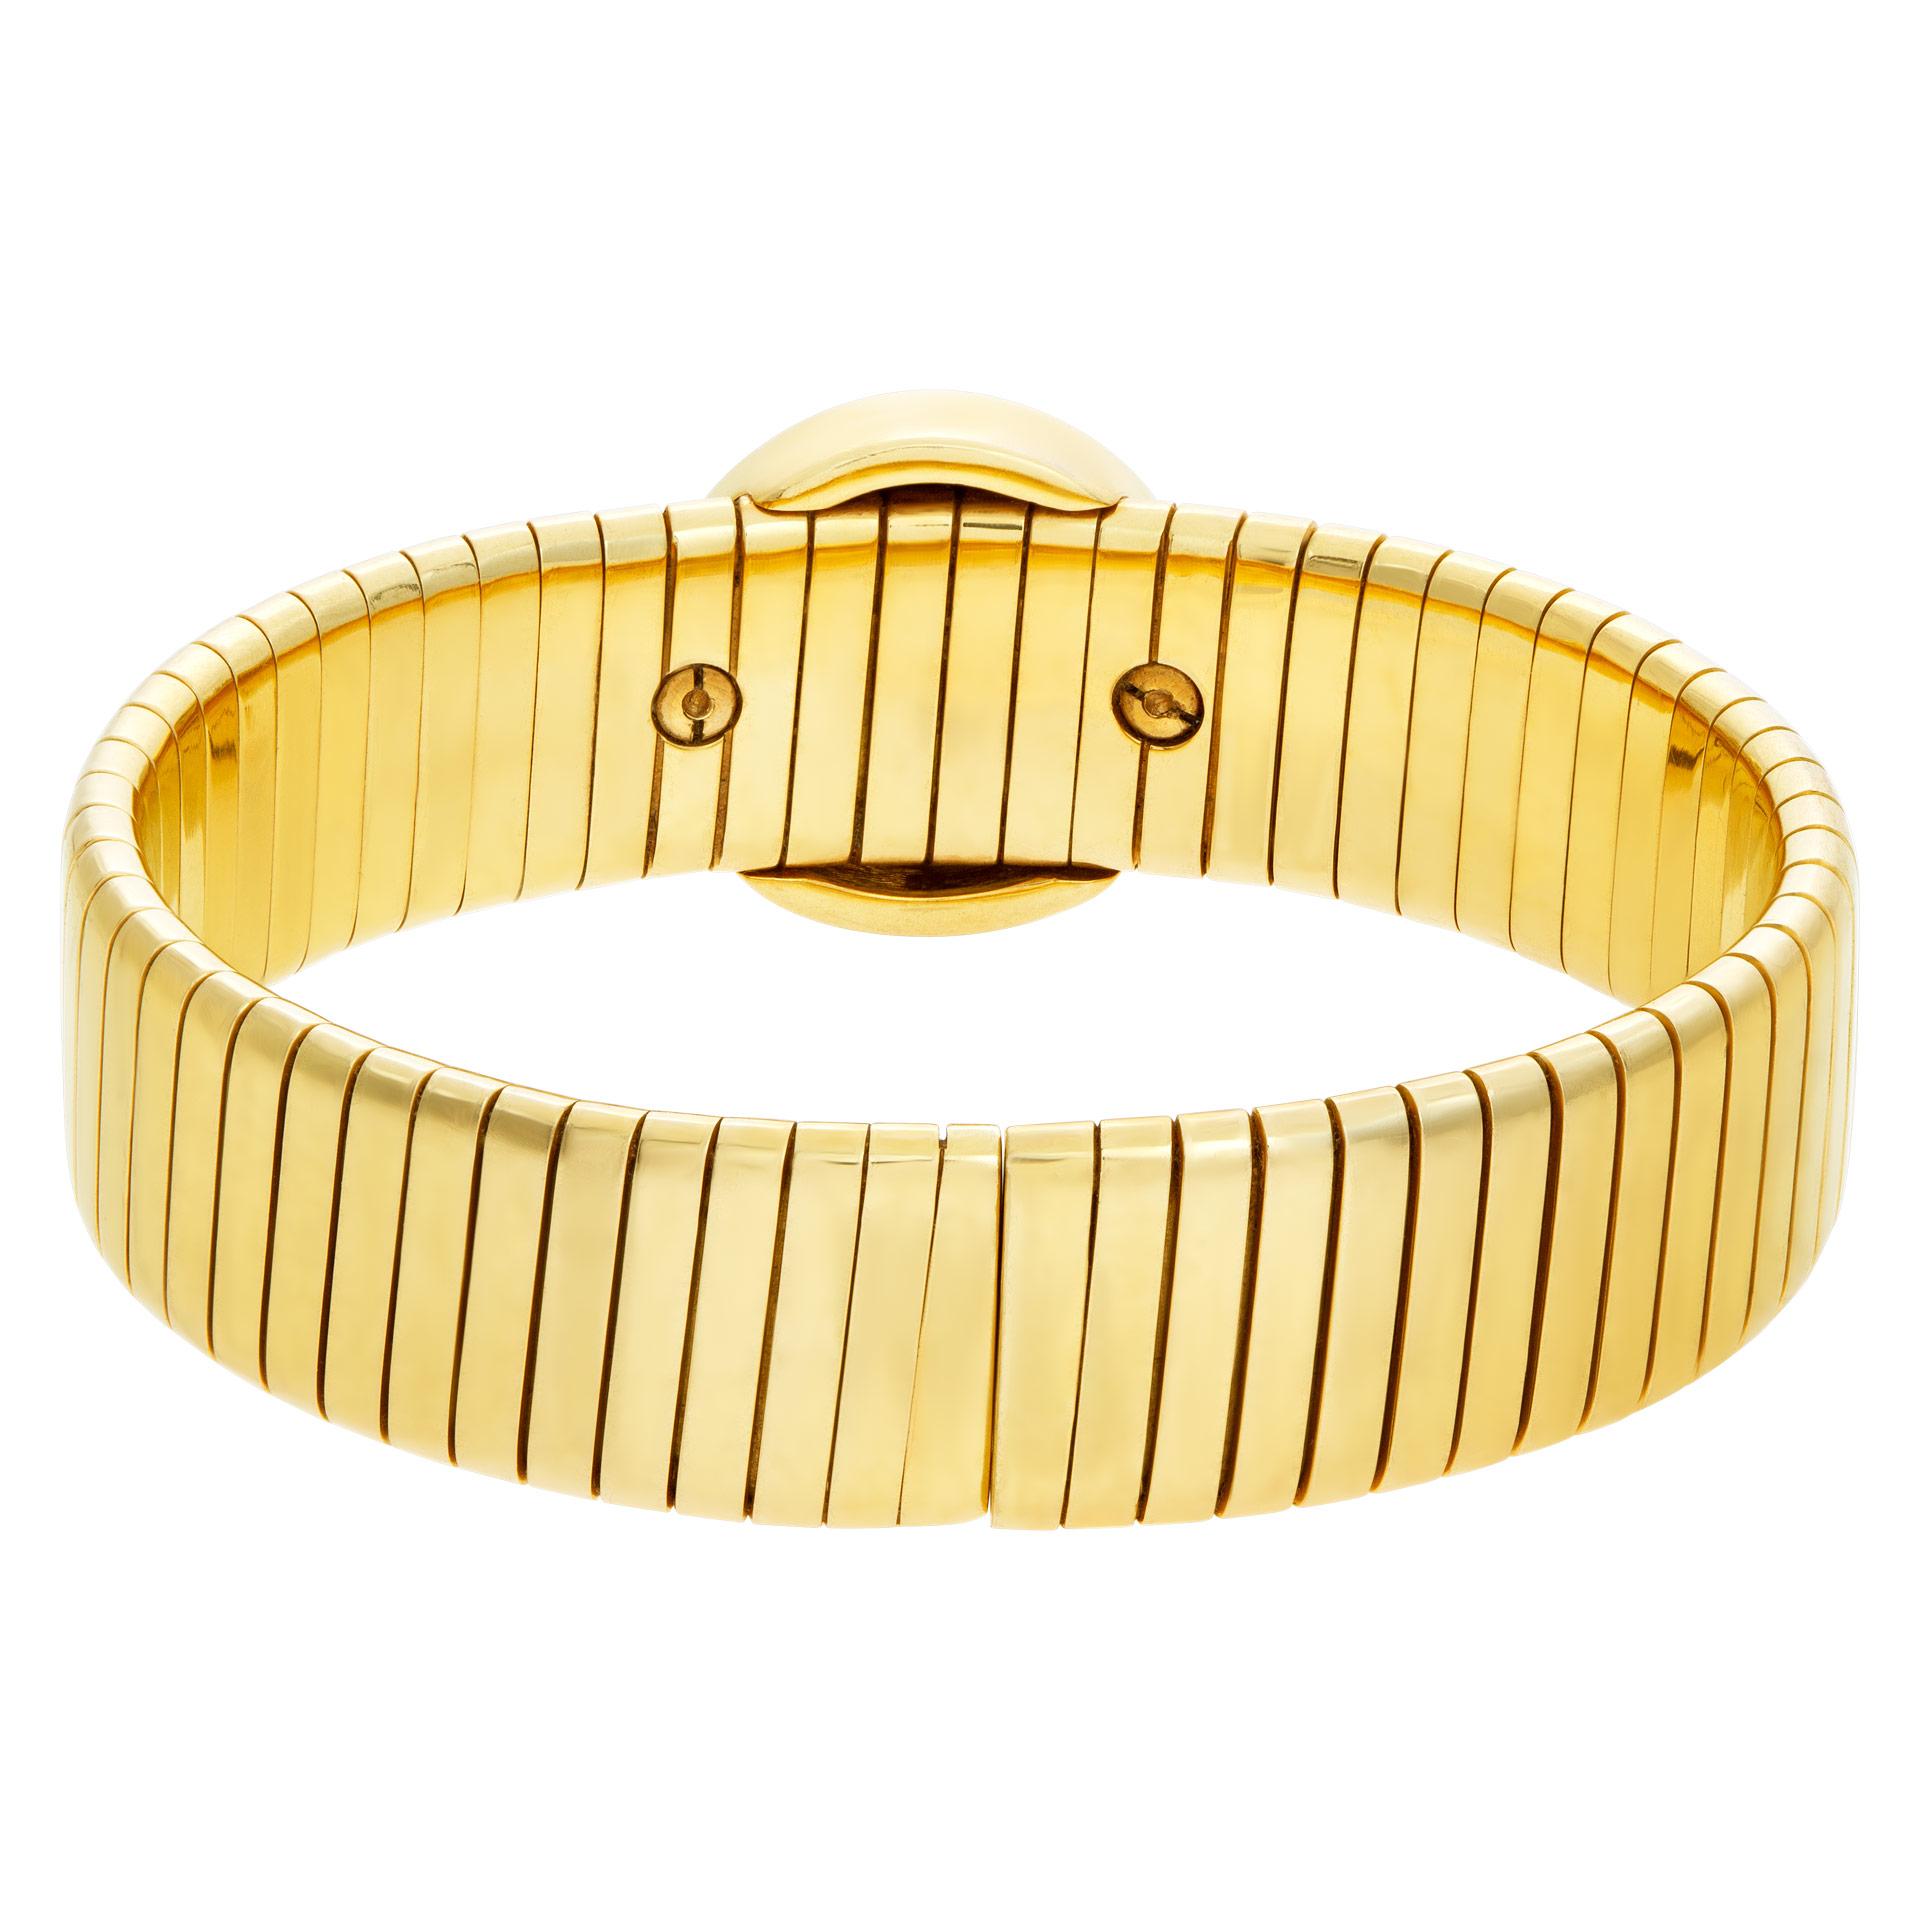 ESTIMATED RETAIL $9890 - YOUR PRICE $6990 - Stunning cuff bangle set with an ancient coin of Massimiliano Ercole (286-305) in 18k yellow gold. Fit for wrist sizes 6''+. 0.50